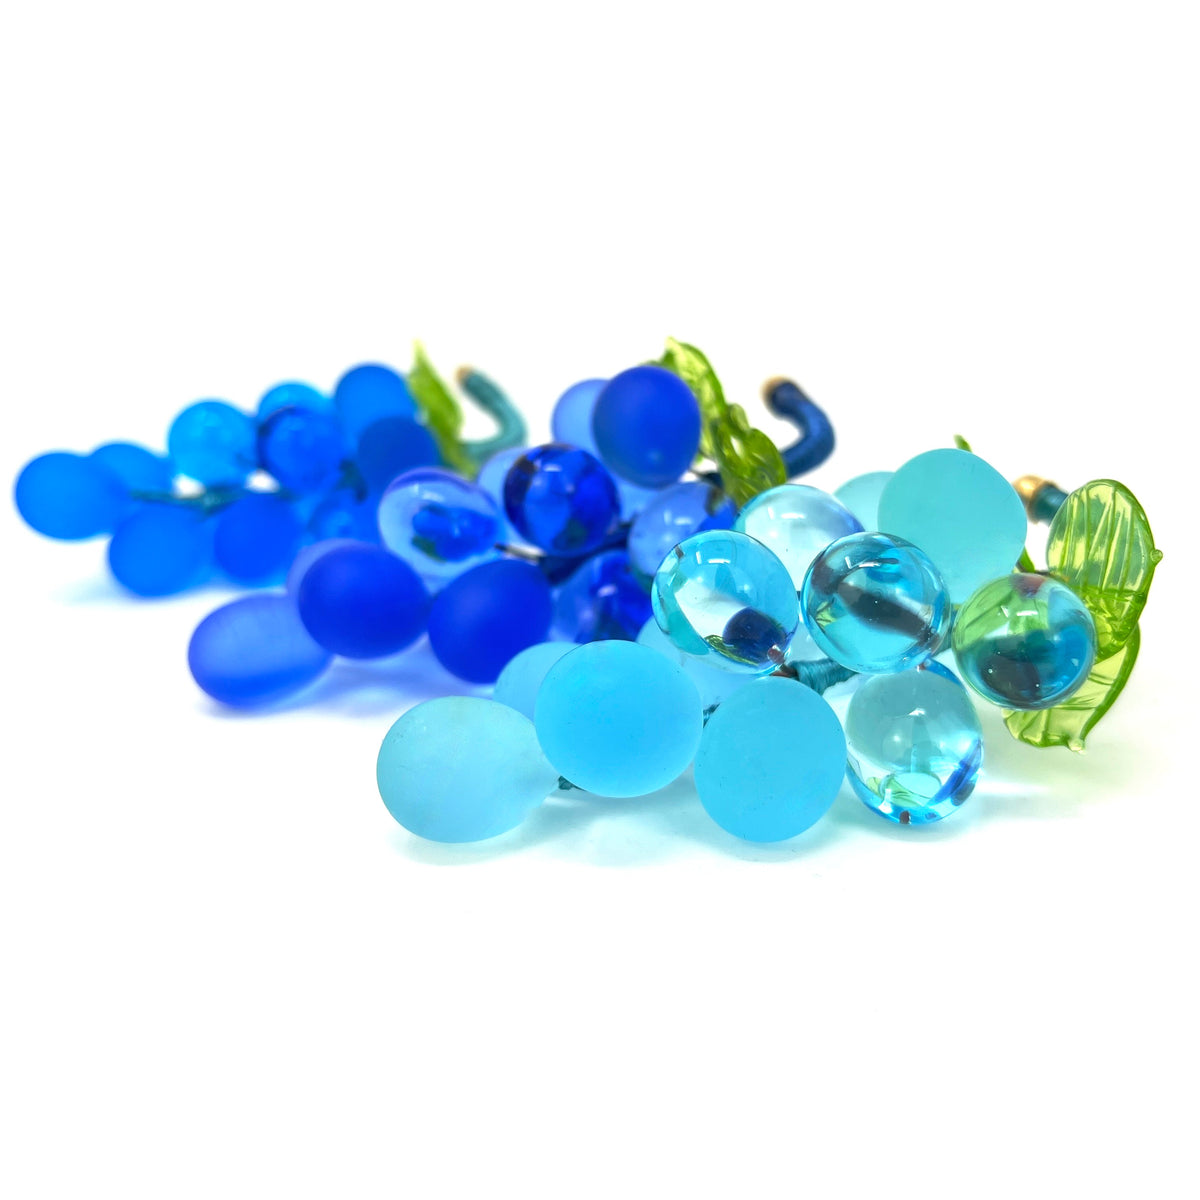 Murano Glass Solid Grape Cluster, Small, Multiple Colors, Made in Italy - My Italian Decor